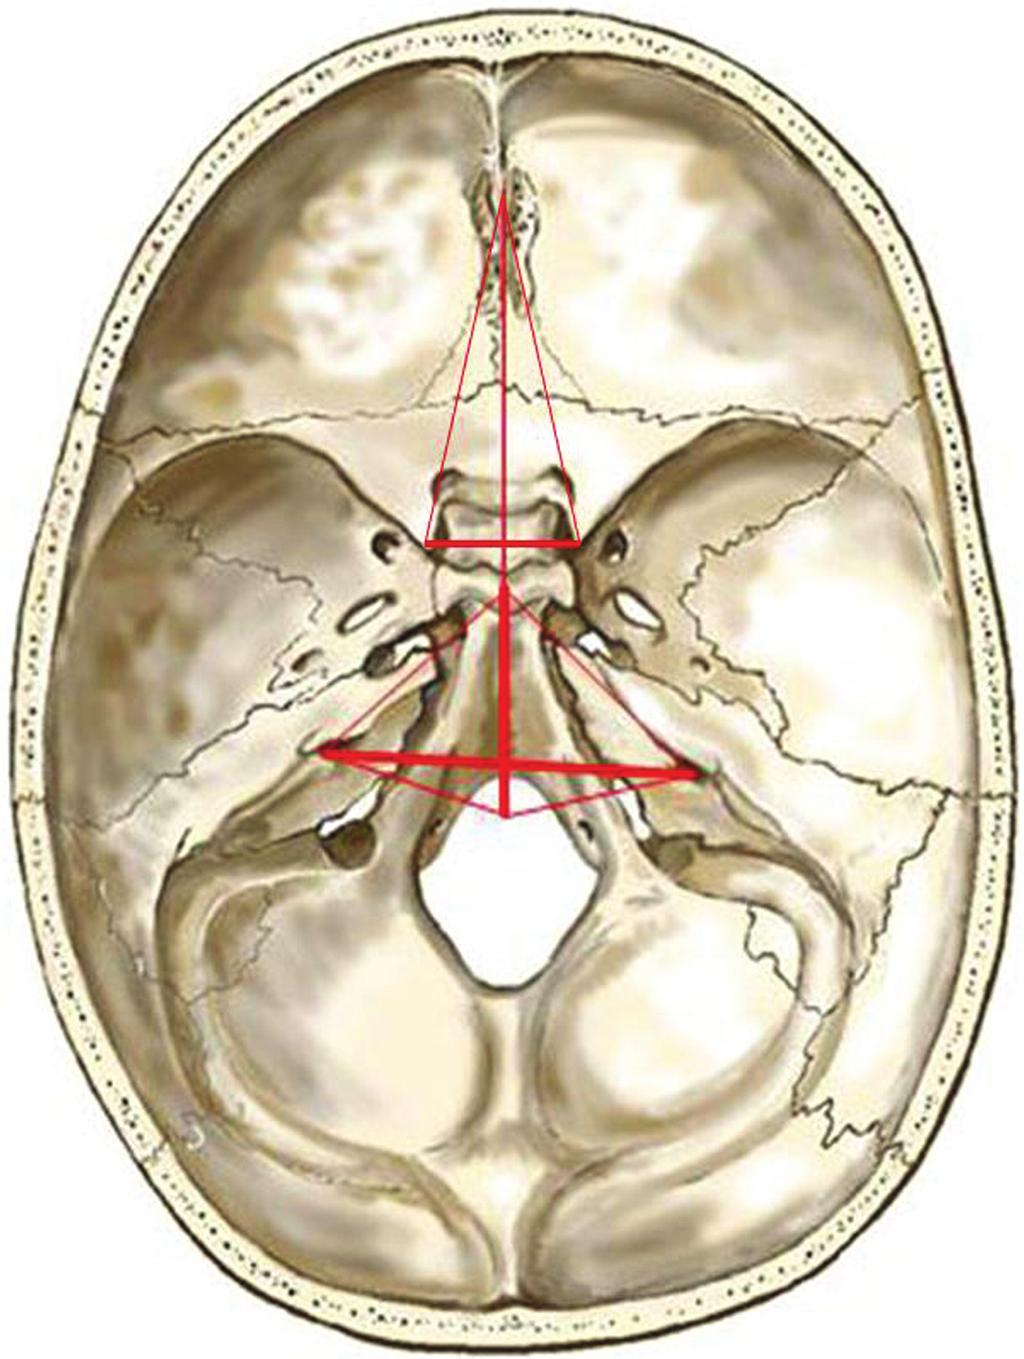 Skull base growth and CM-I Clinical Material and Methods Outline of the Study Using a segmentation technique already described, anatomical osseous landmarks of the skull base were identified on axial